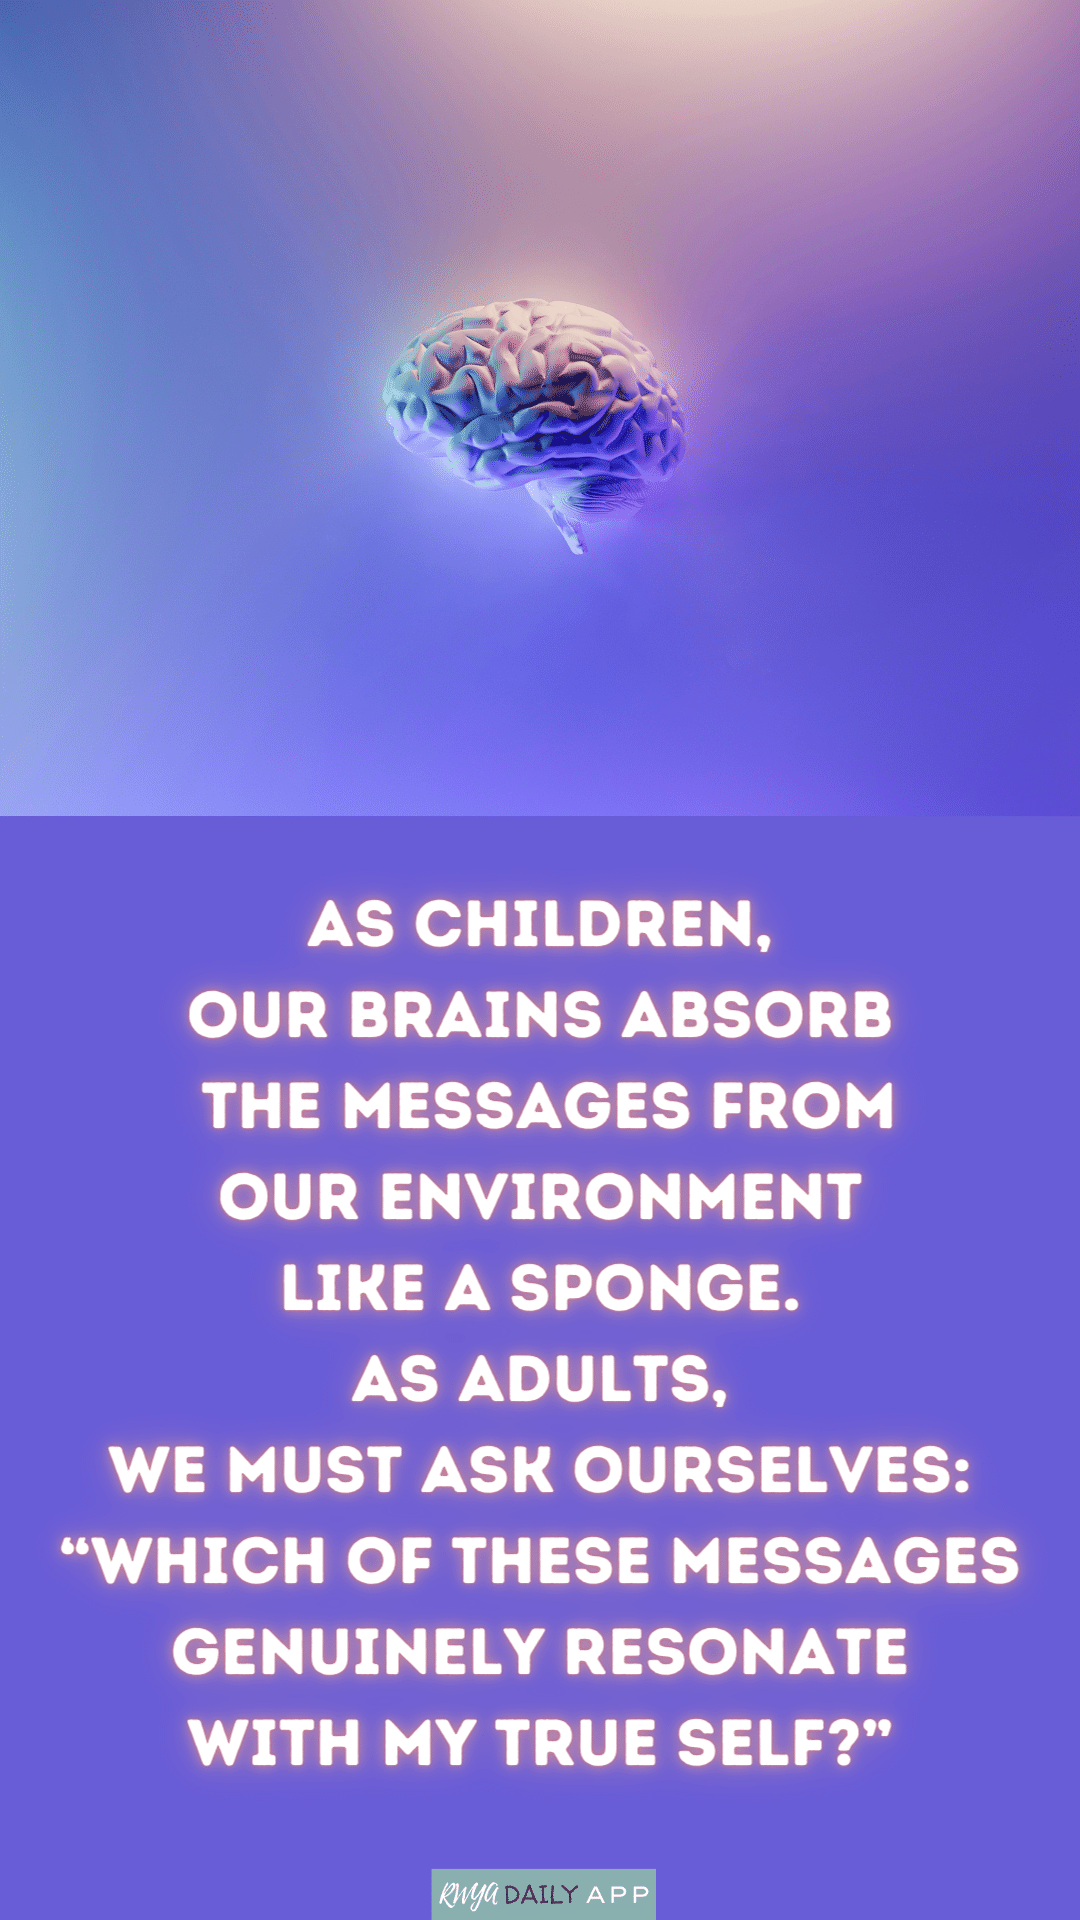 As children, we absorb the messages from our environment like a sponge. As adults, we must ask ourselves: Which of these messages genuinely resonate with my true self?